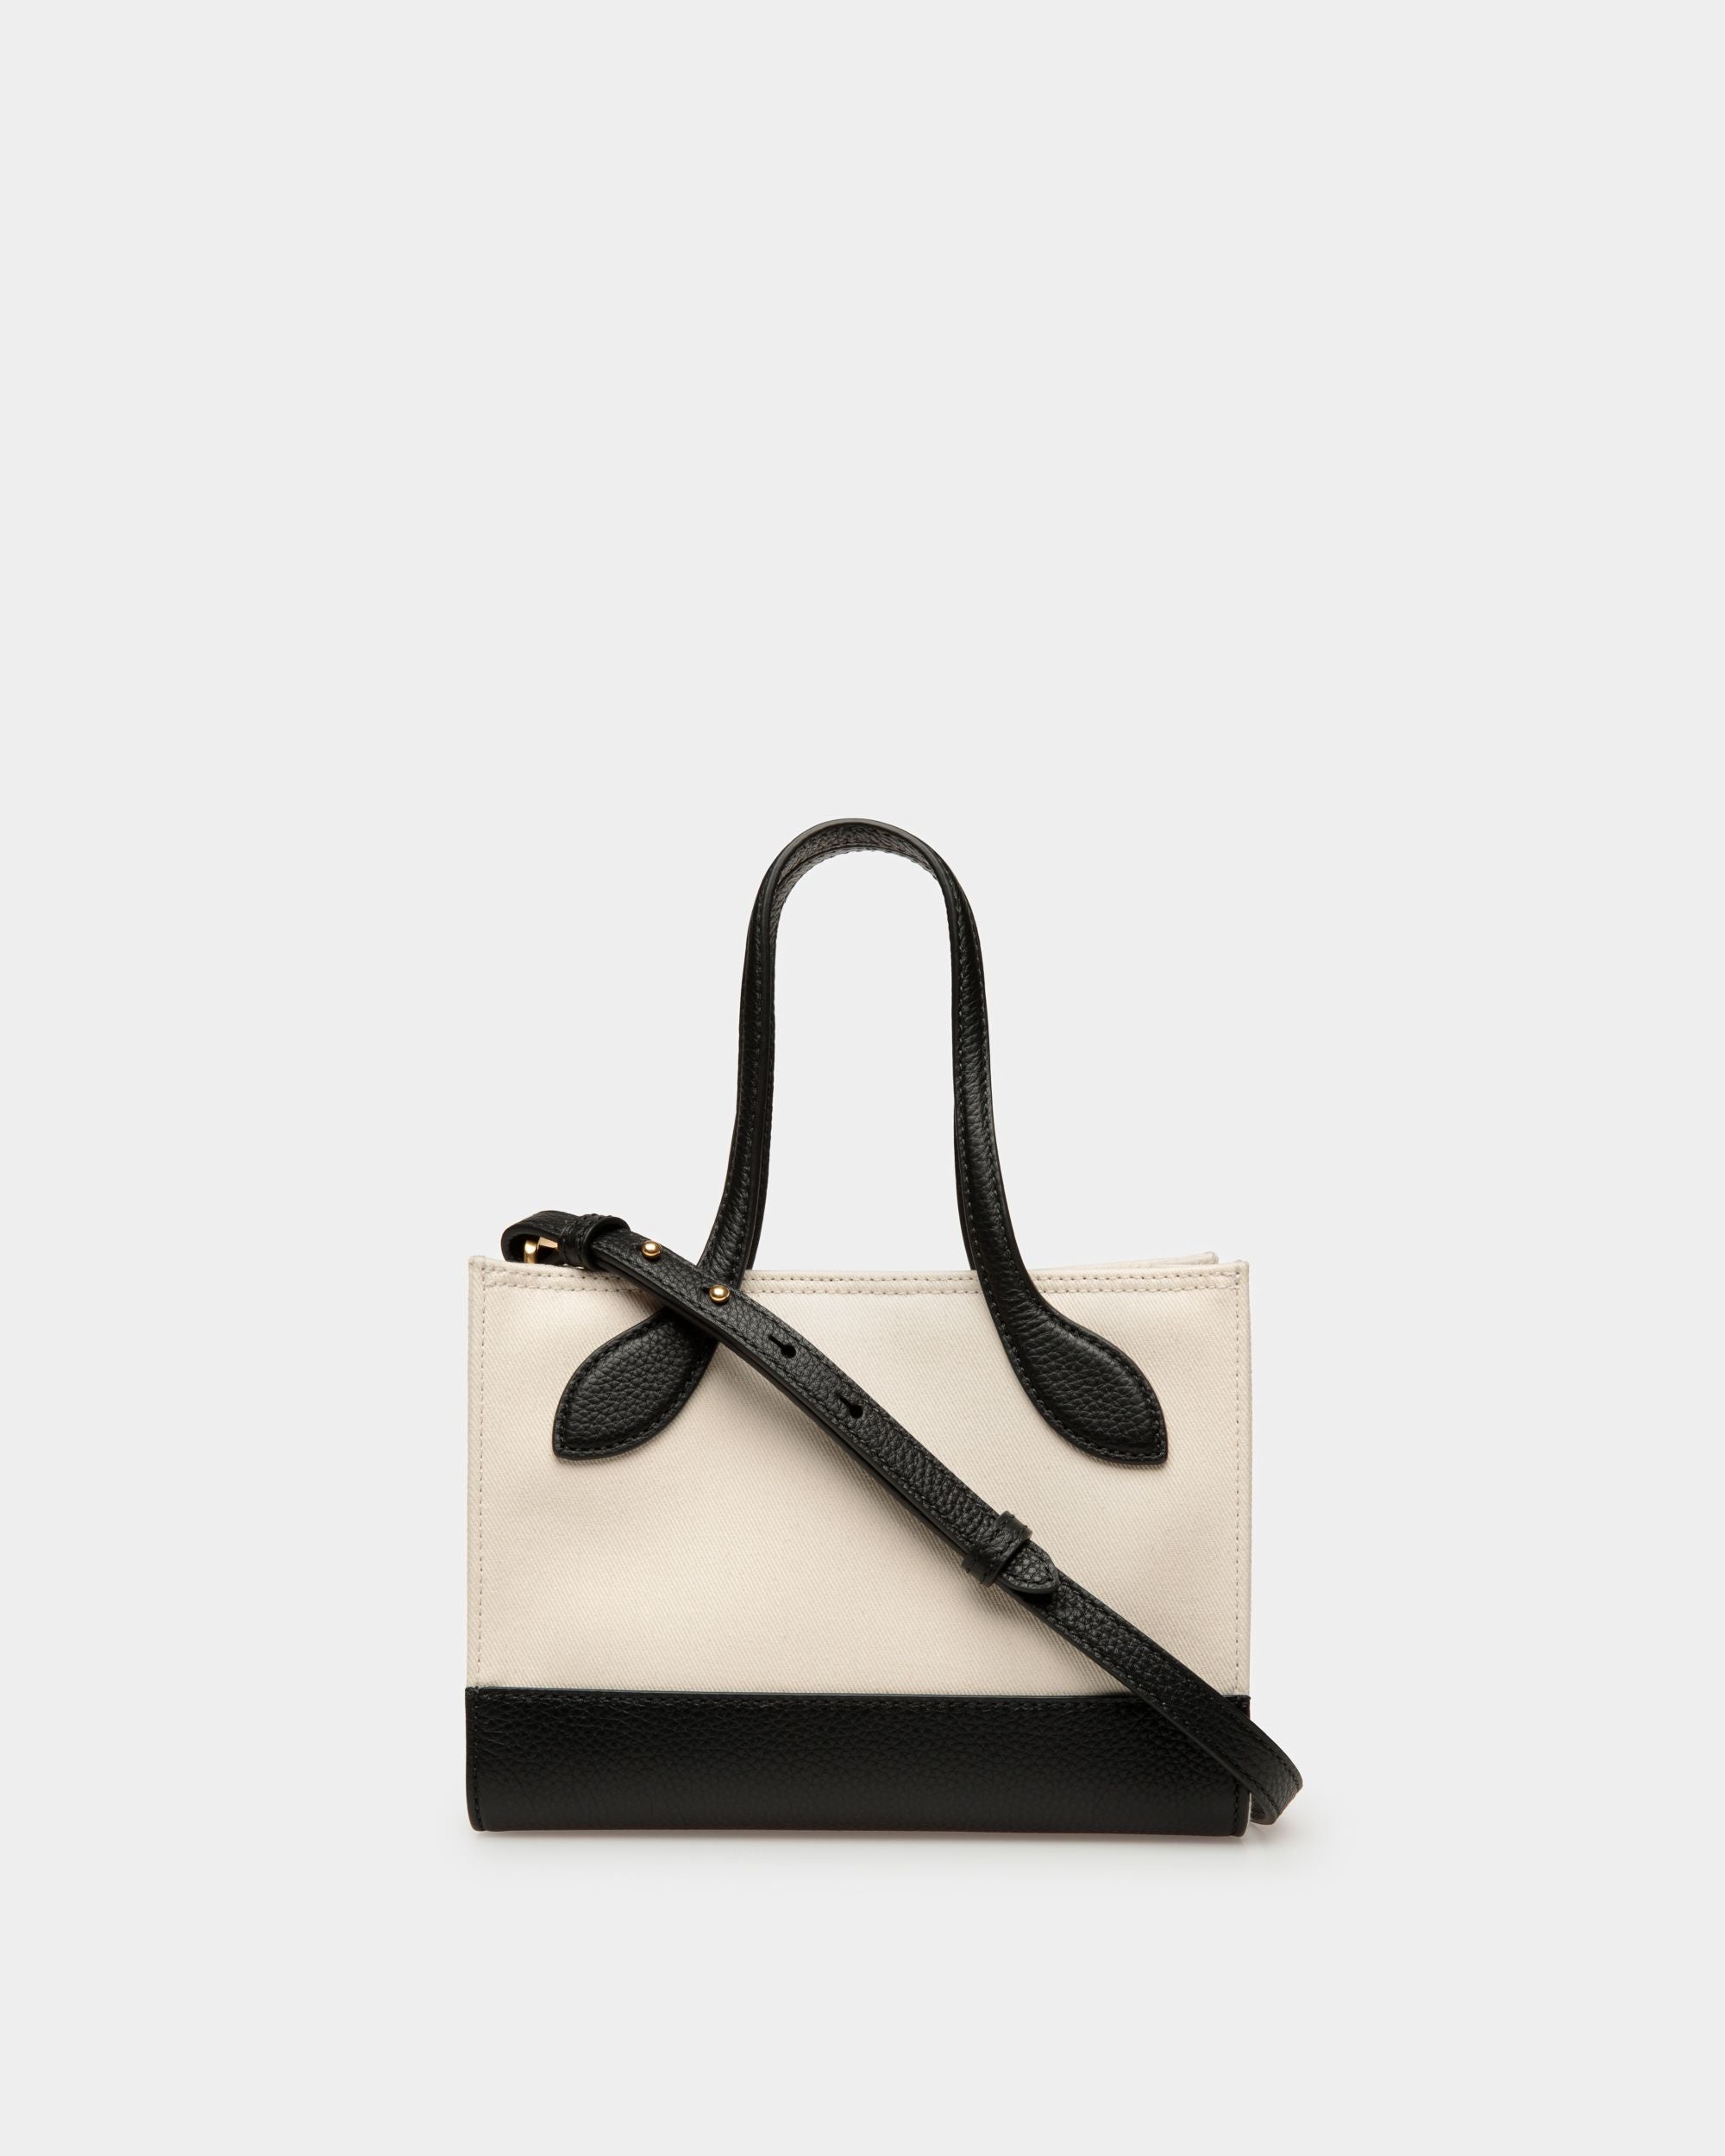 Keep On Extra Small | Women's Minibag | Natural And Black Fabric | Bally | Still Life Back